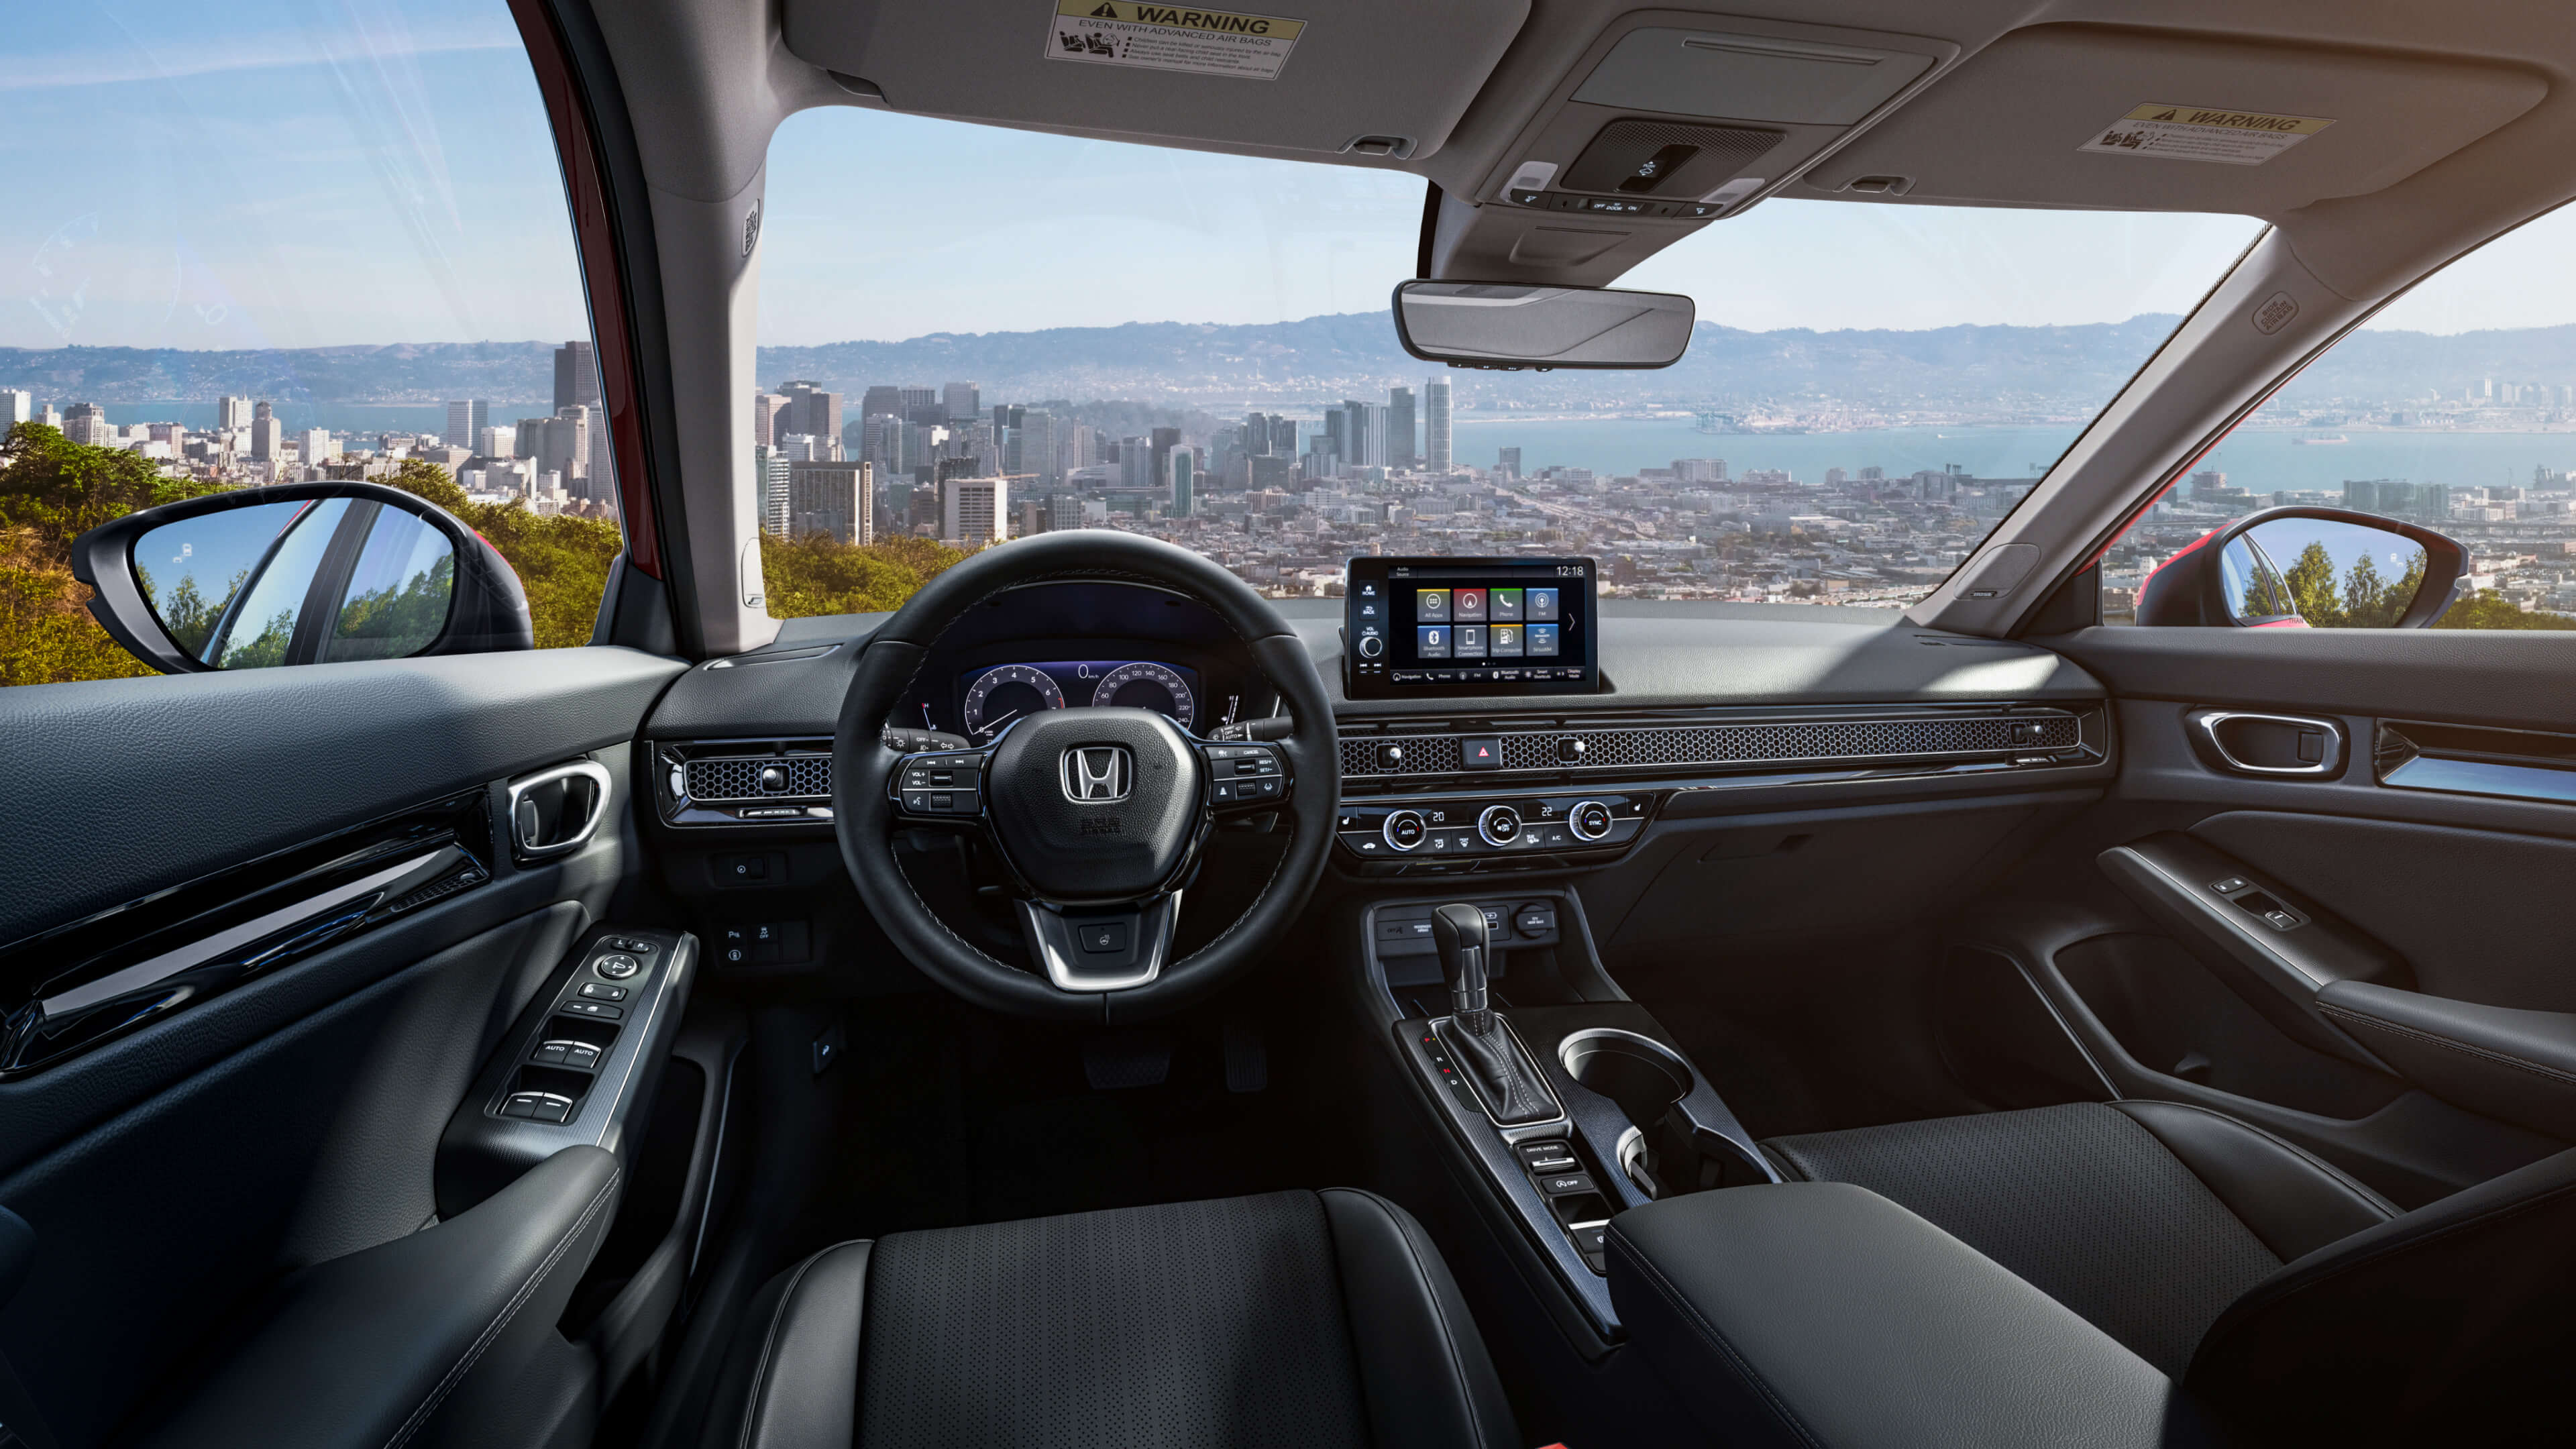 Interior cockpit of a 2022 Honda Civic from the driver’s point of view. The shot overlooks a city on a bay as seen through the windshield from atop a peak.